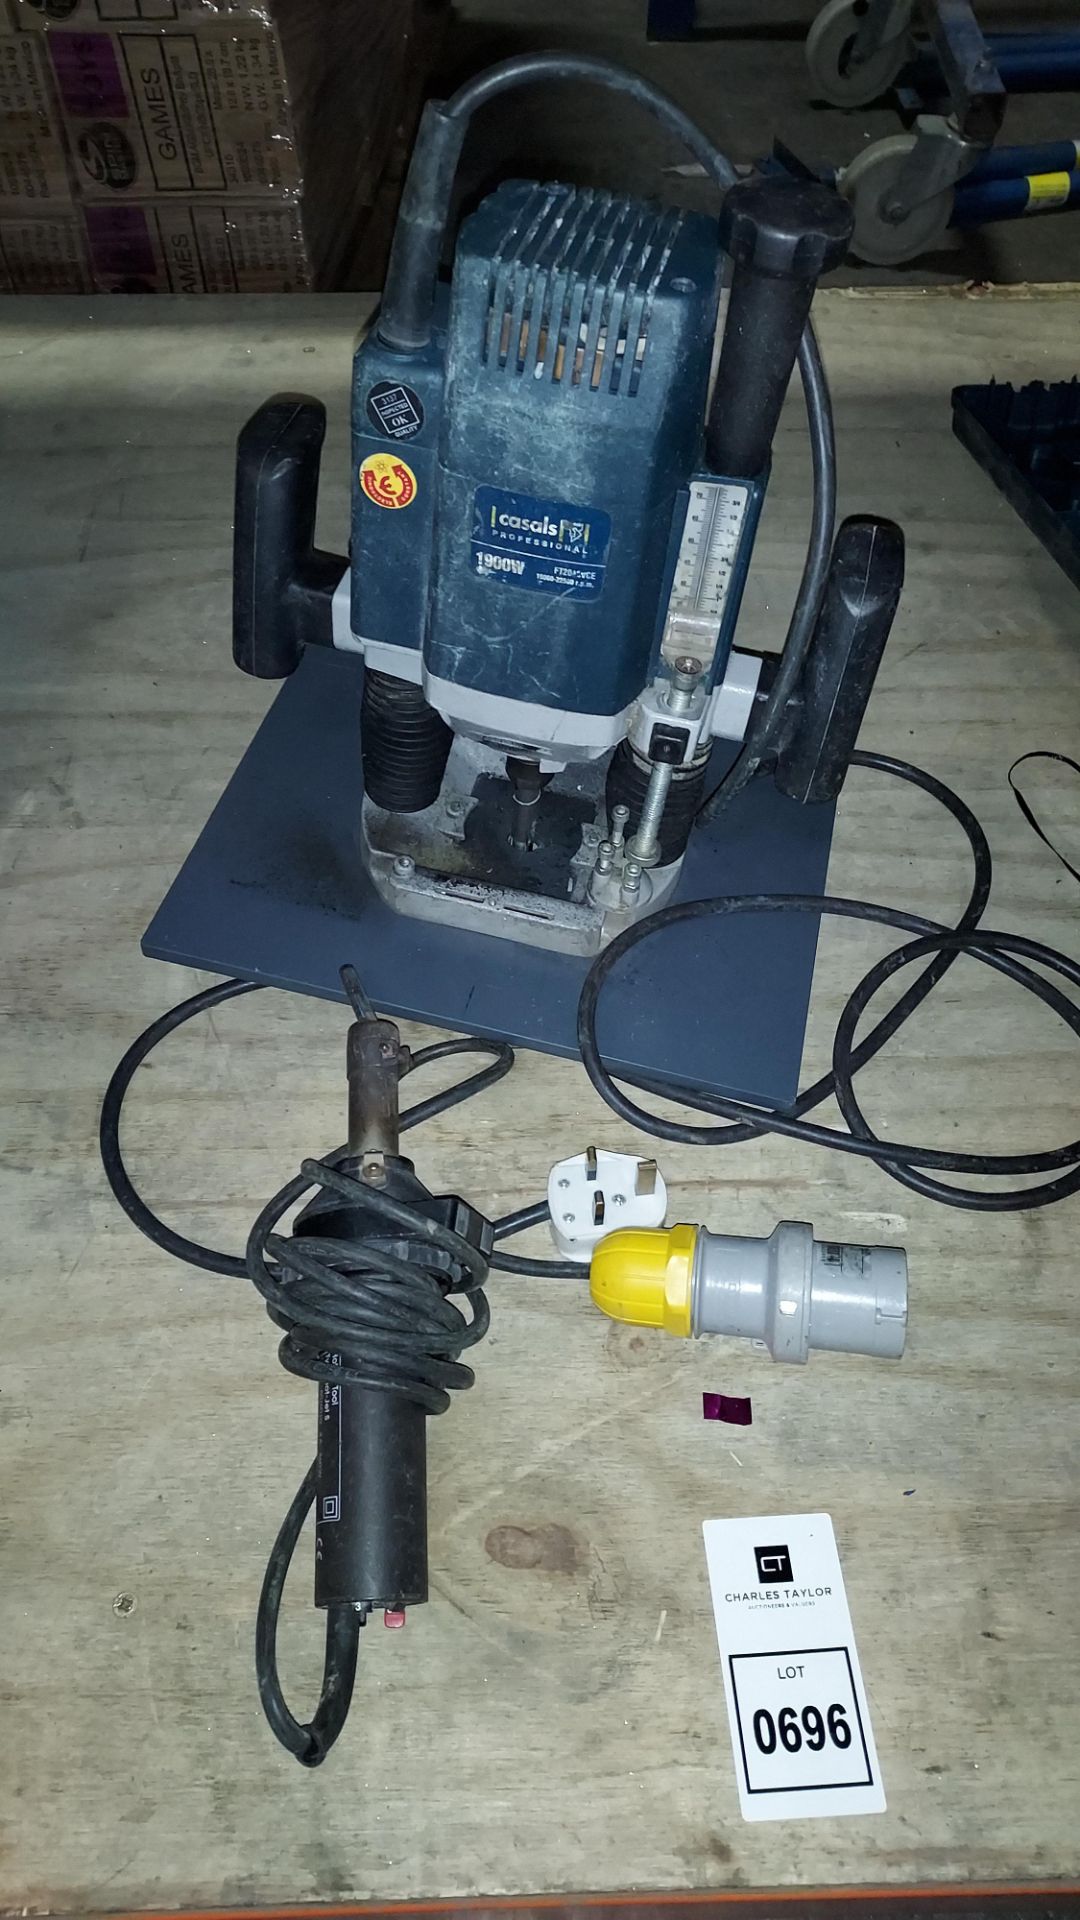 2 PIECE MIXED TOOL LOT INCLUDNG LEISTER HOT-JET S HOT AIR TOOL AND 1 CASALS PROFFESIONAL 1900W PILAR